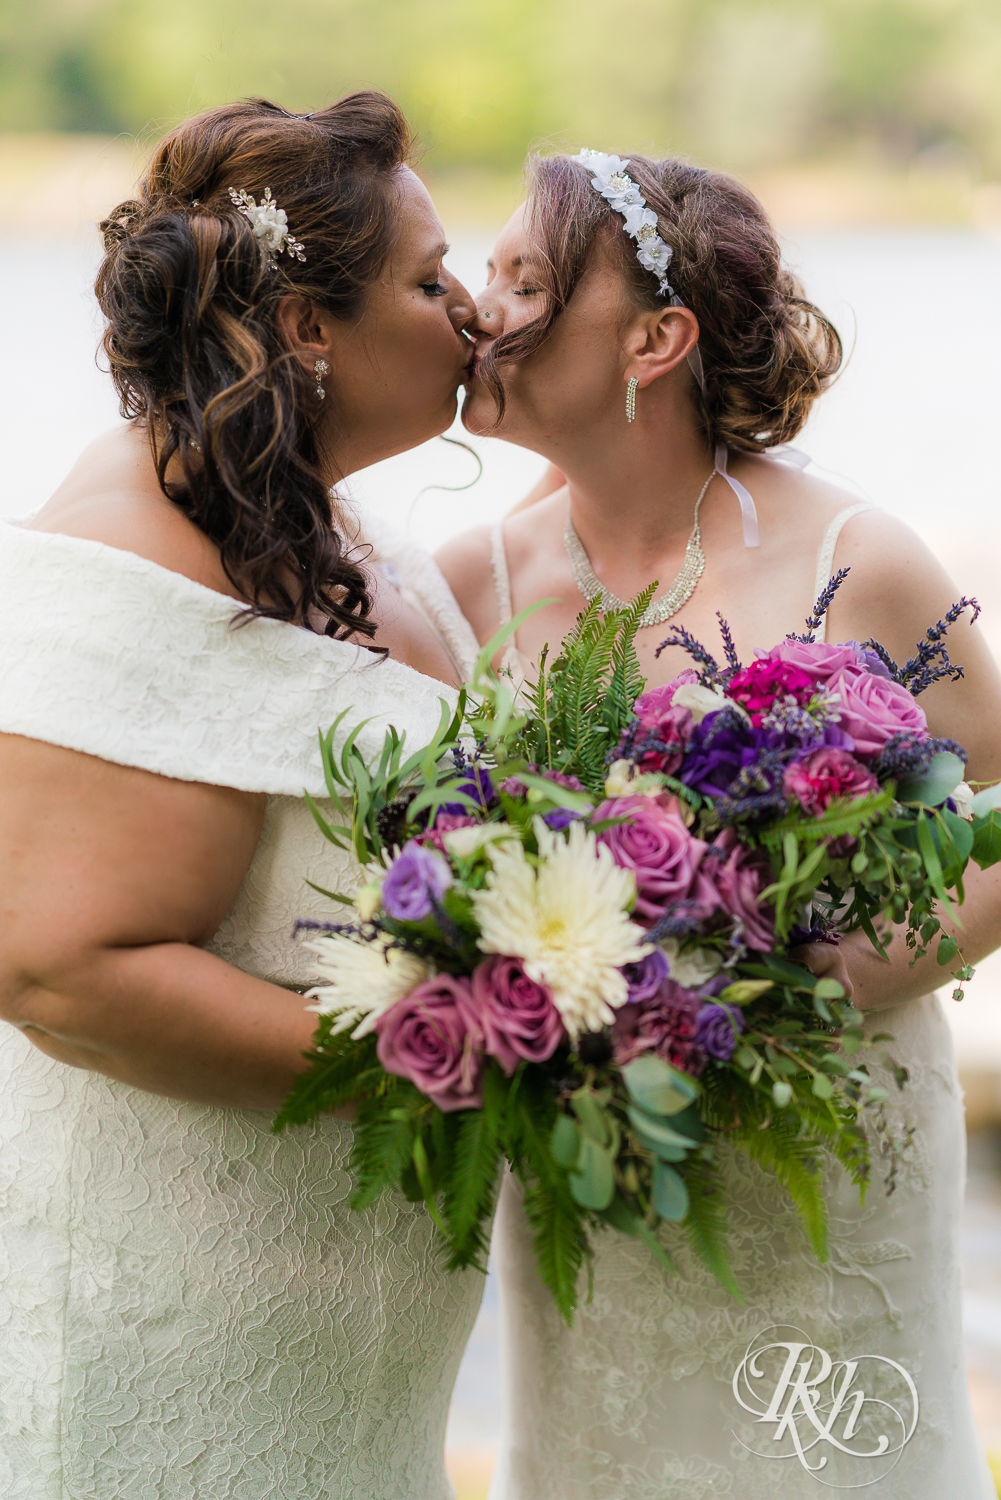 Lesbian brides kissing by the water at wedding in Champlin, Minnesota.